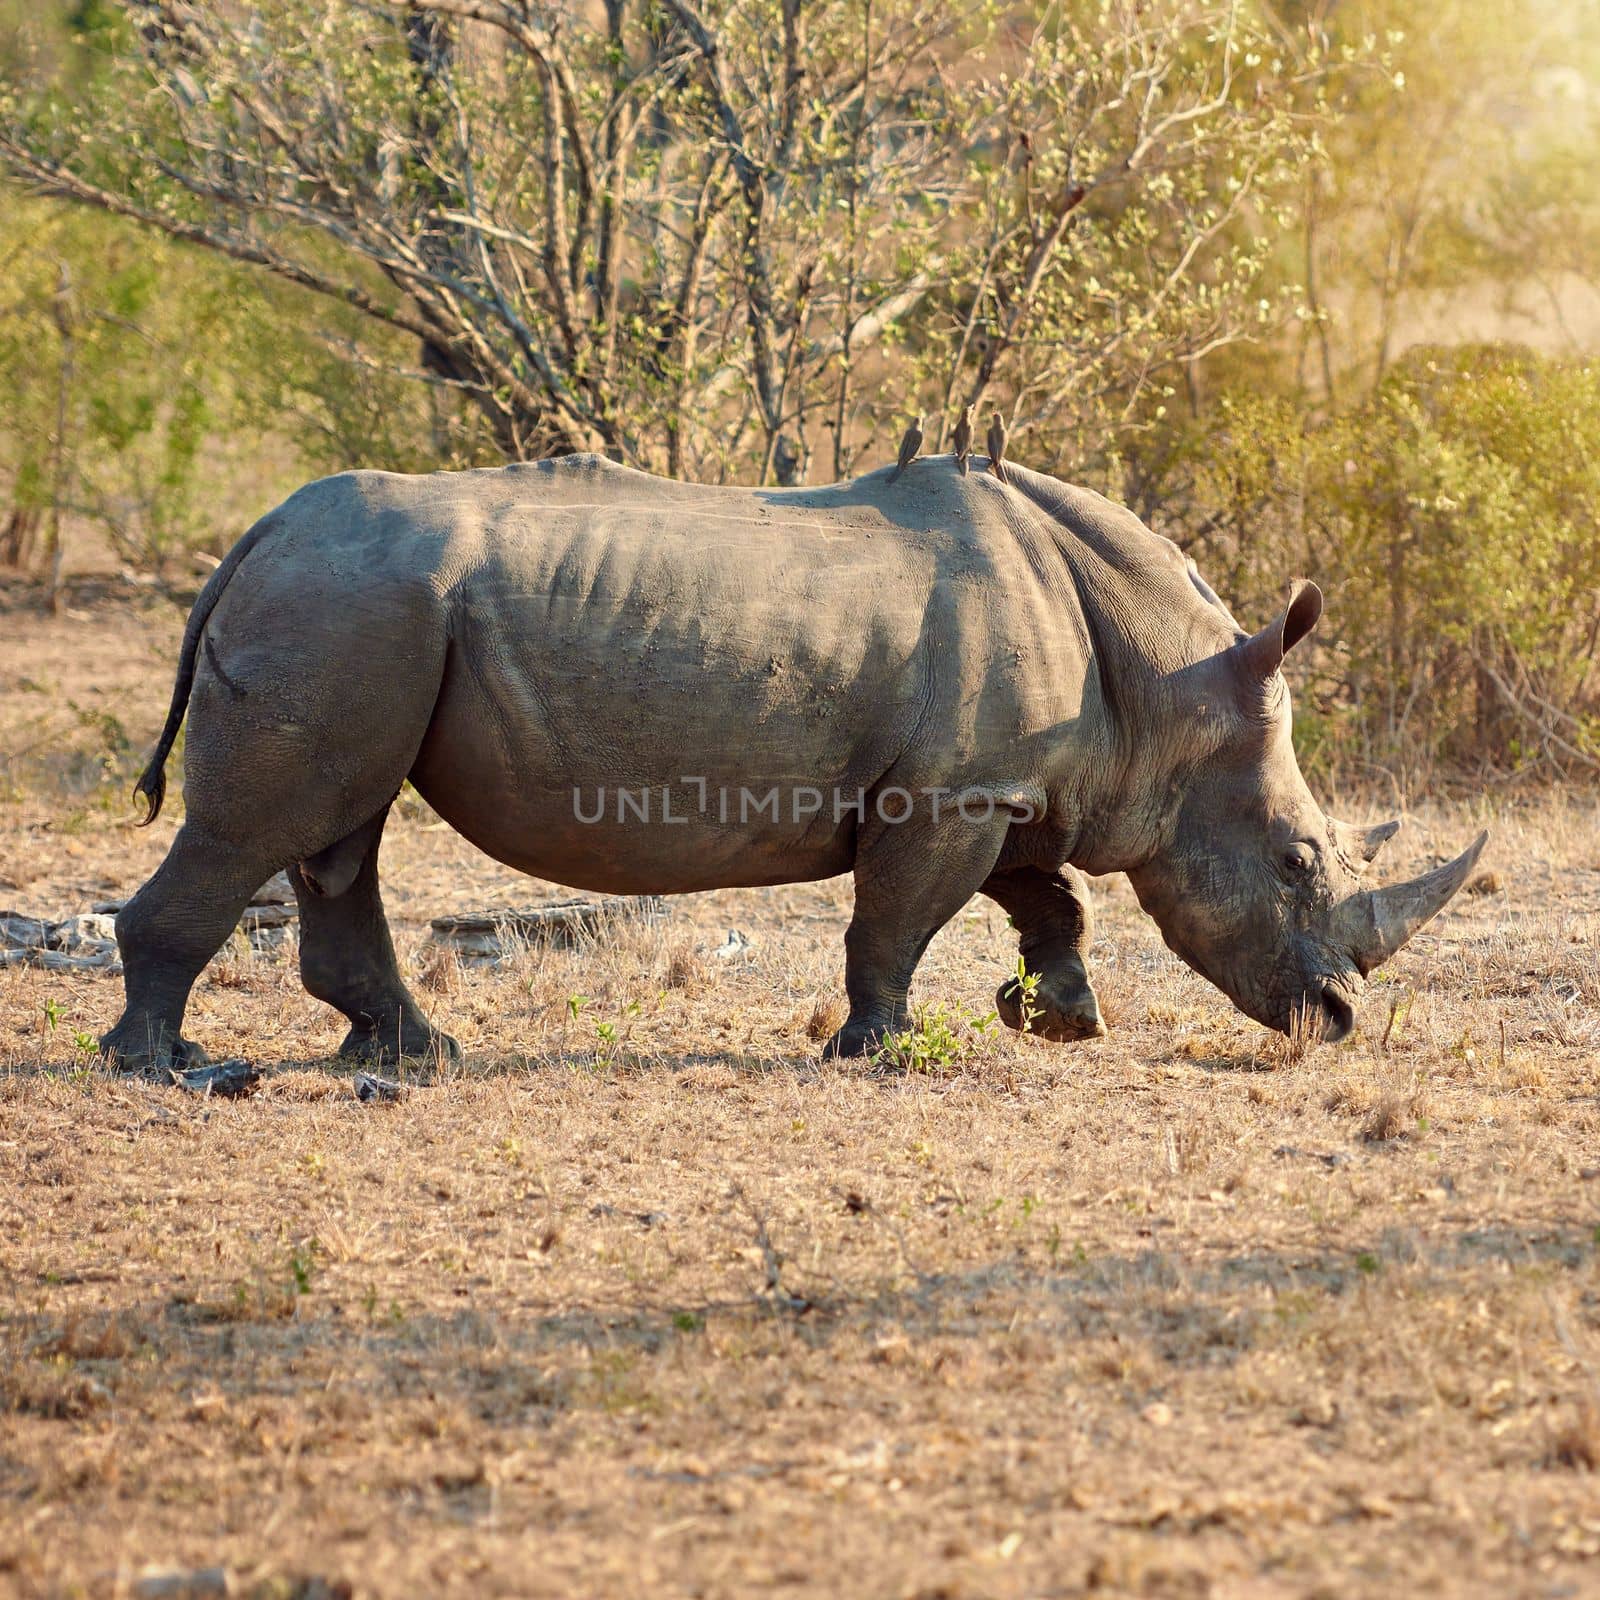 Lets keep these rhinos safe. Full length shot of a rhinoceros in the wild